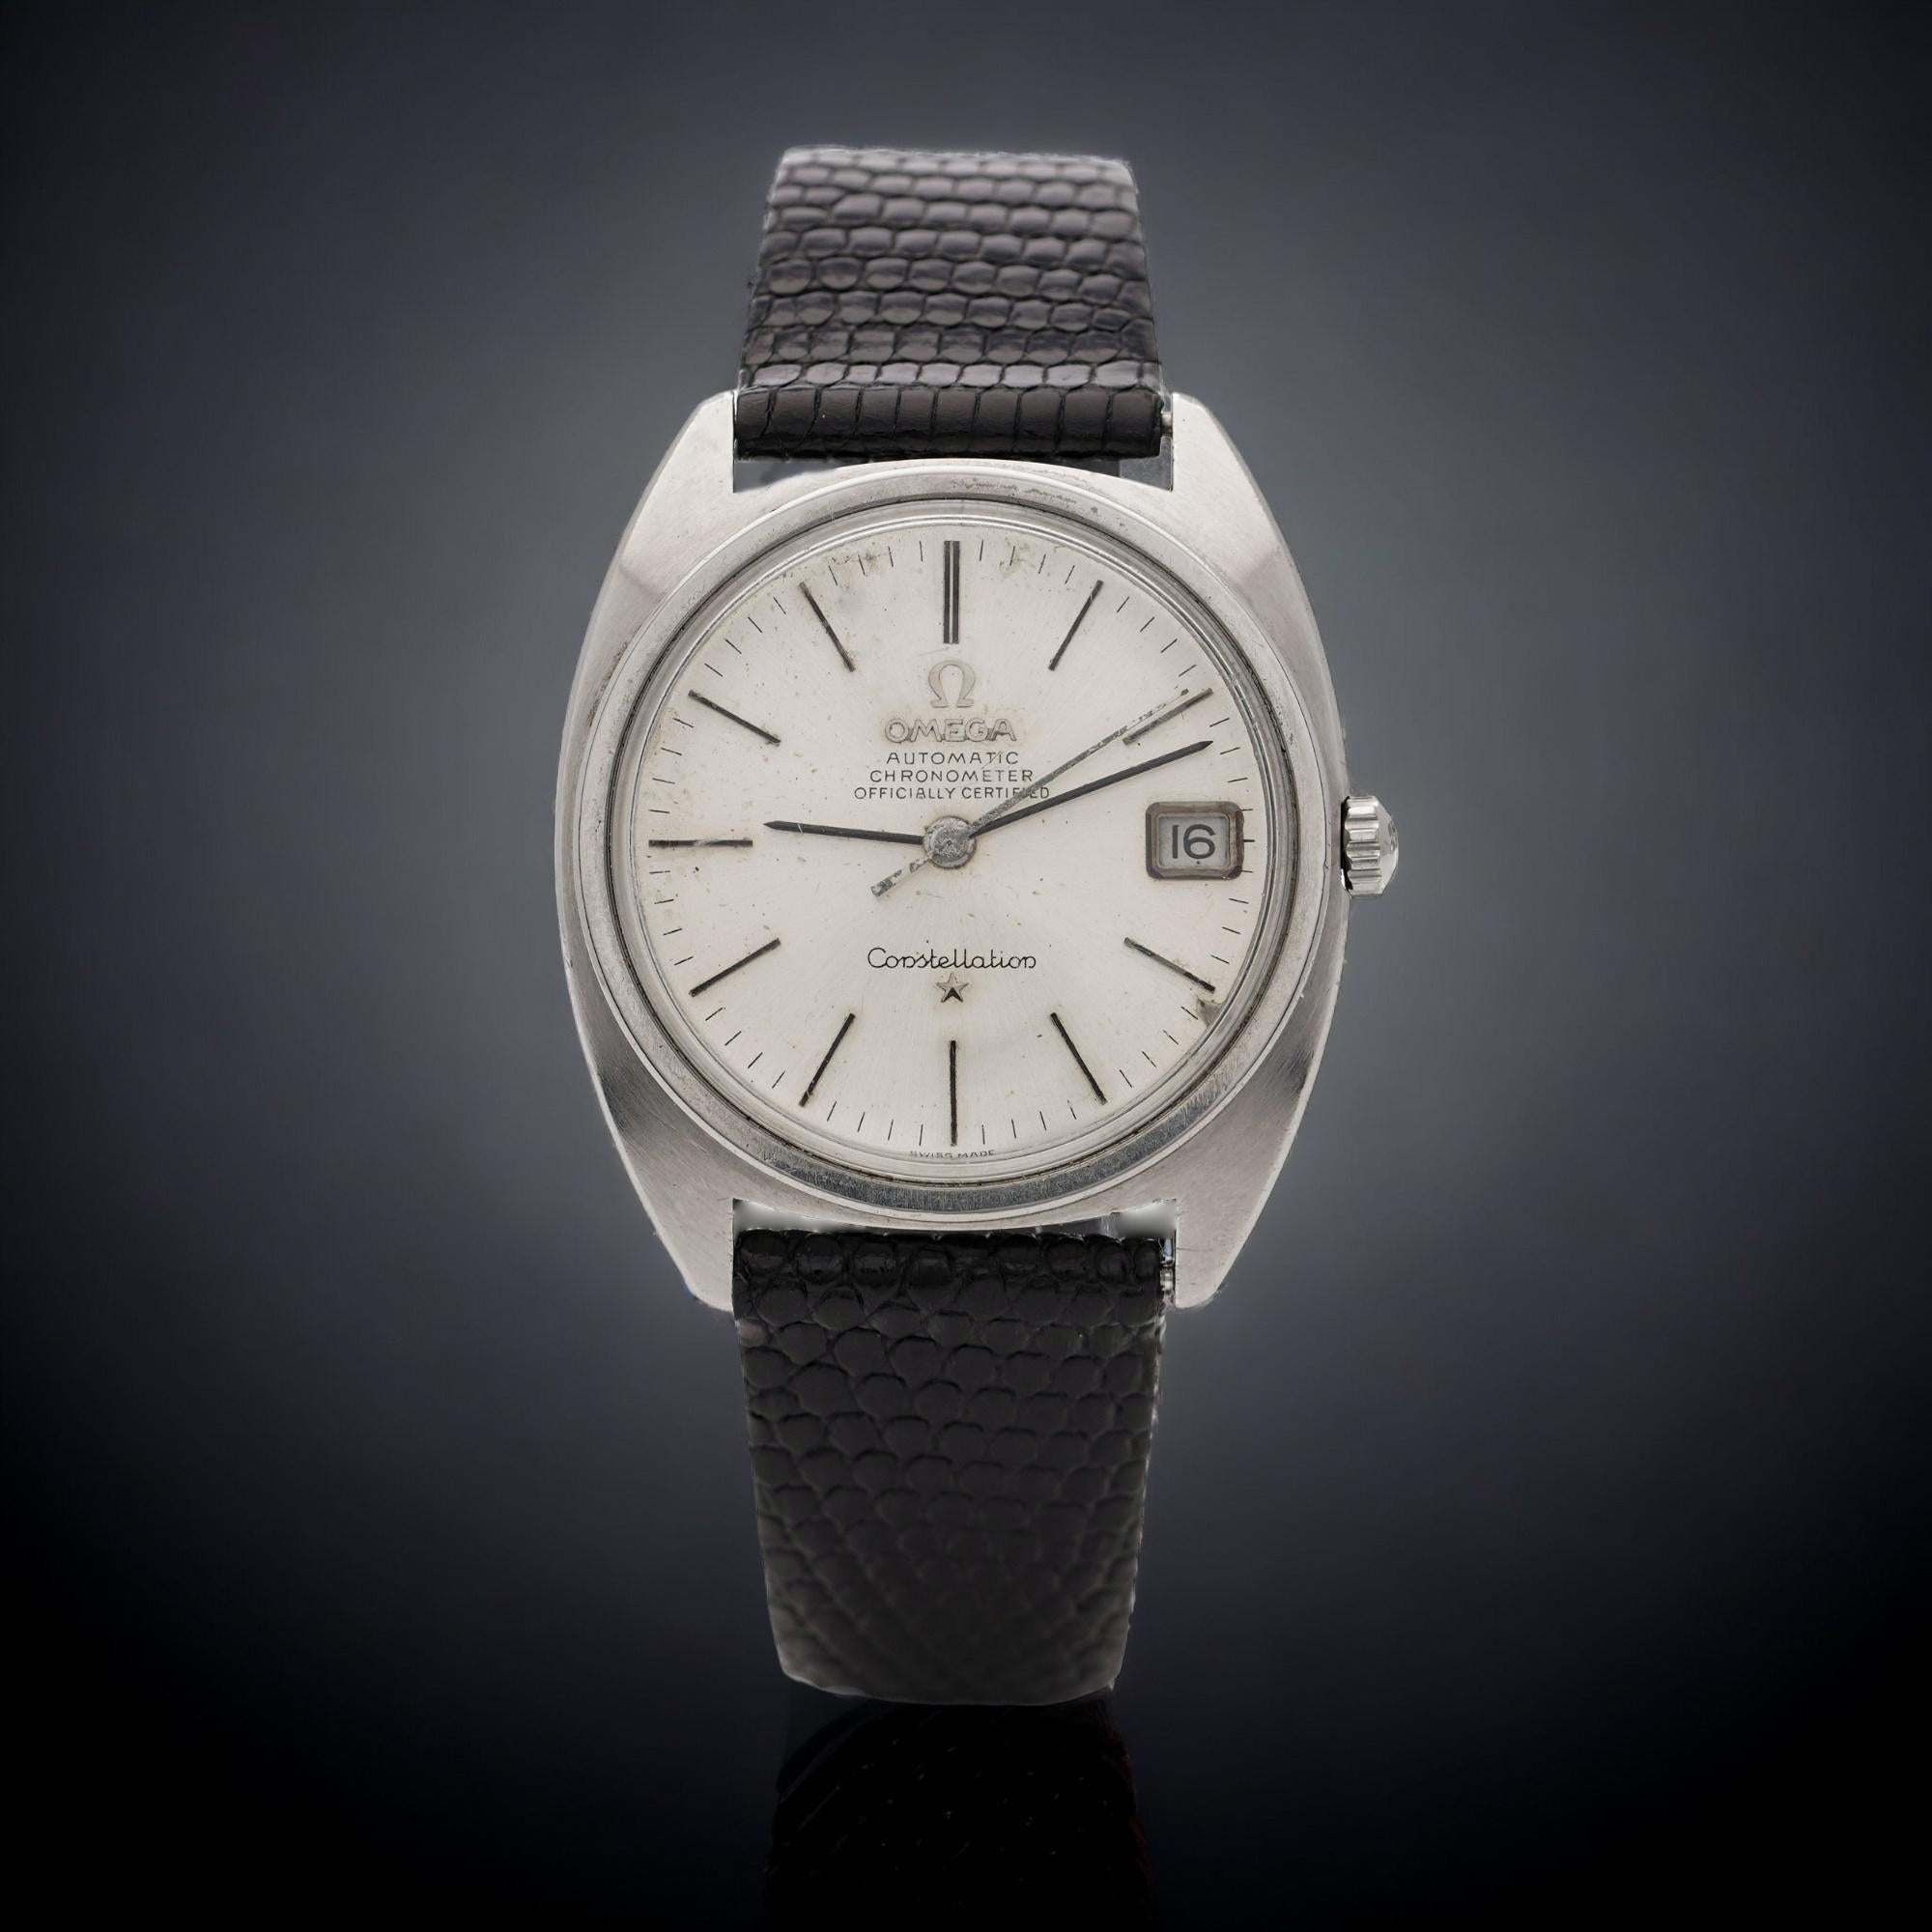 Omega vintage stainless steel Constellation Day/Date, 168.017
Collection: Constellation
Model: Constellation
Reference: 168.017
Period: 1960's
Movement: Mechanical Automatic 
Calibre: 564
Case Material: Stainless Steel 
Case form: Barrel-shaped
Dial